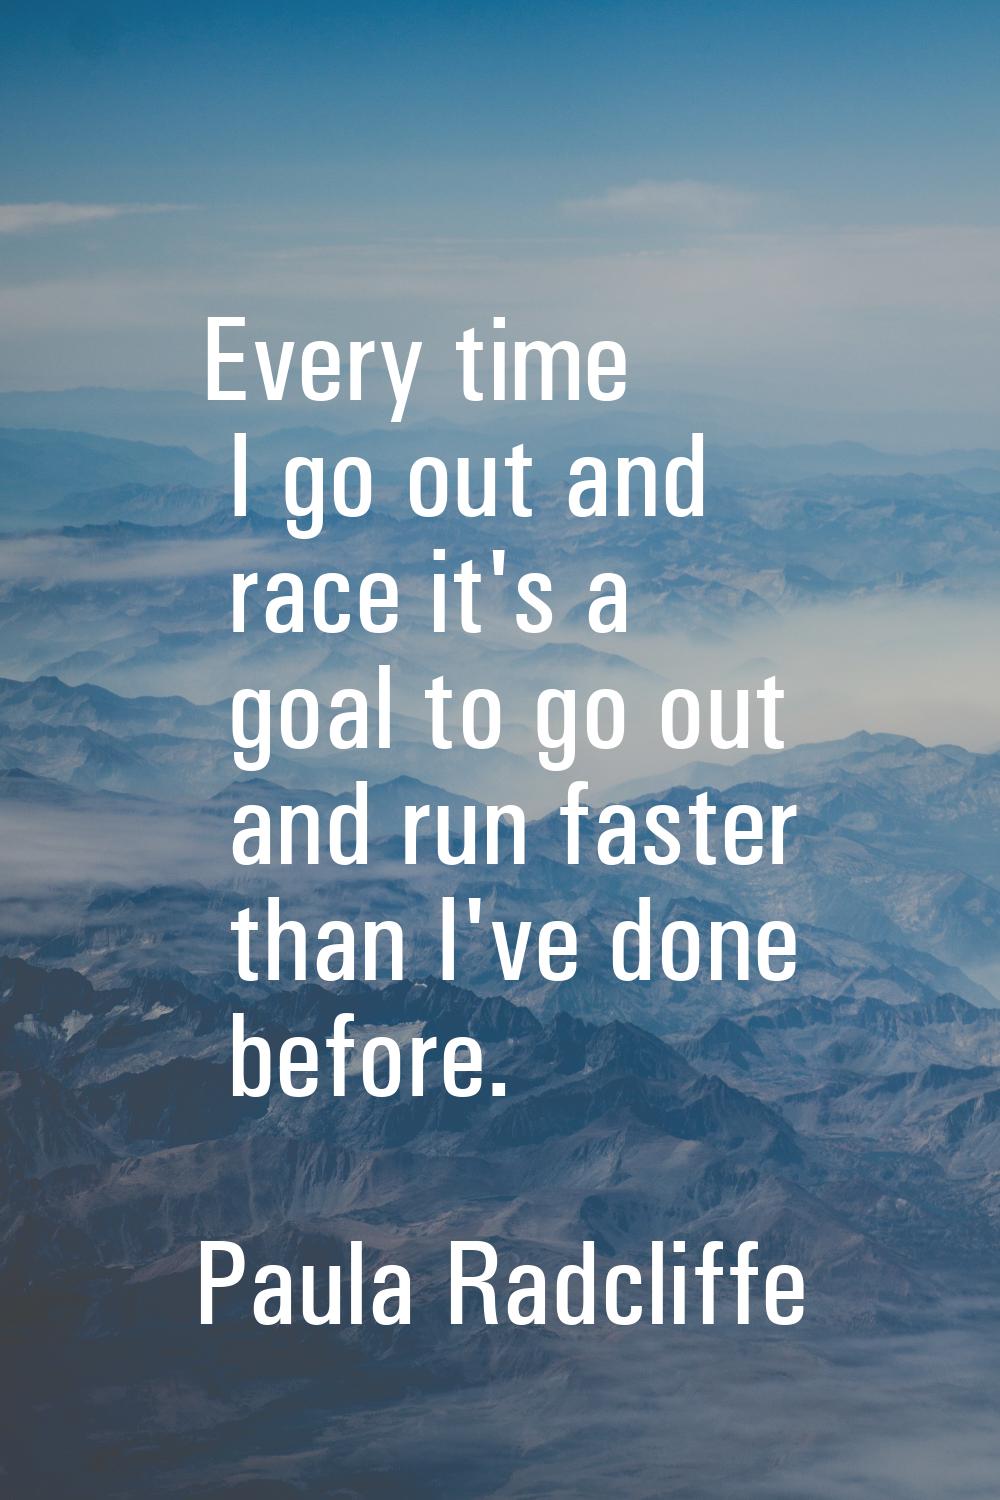 Every time I go out and race it's a goal to go out and run faster than I've done before.